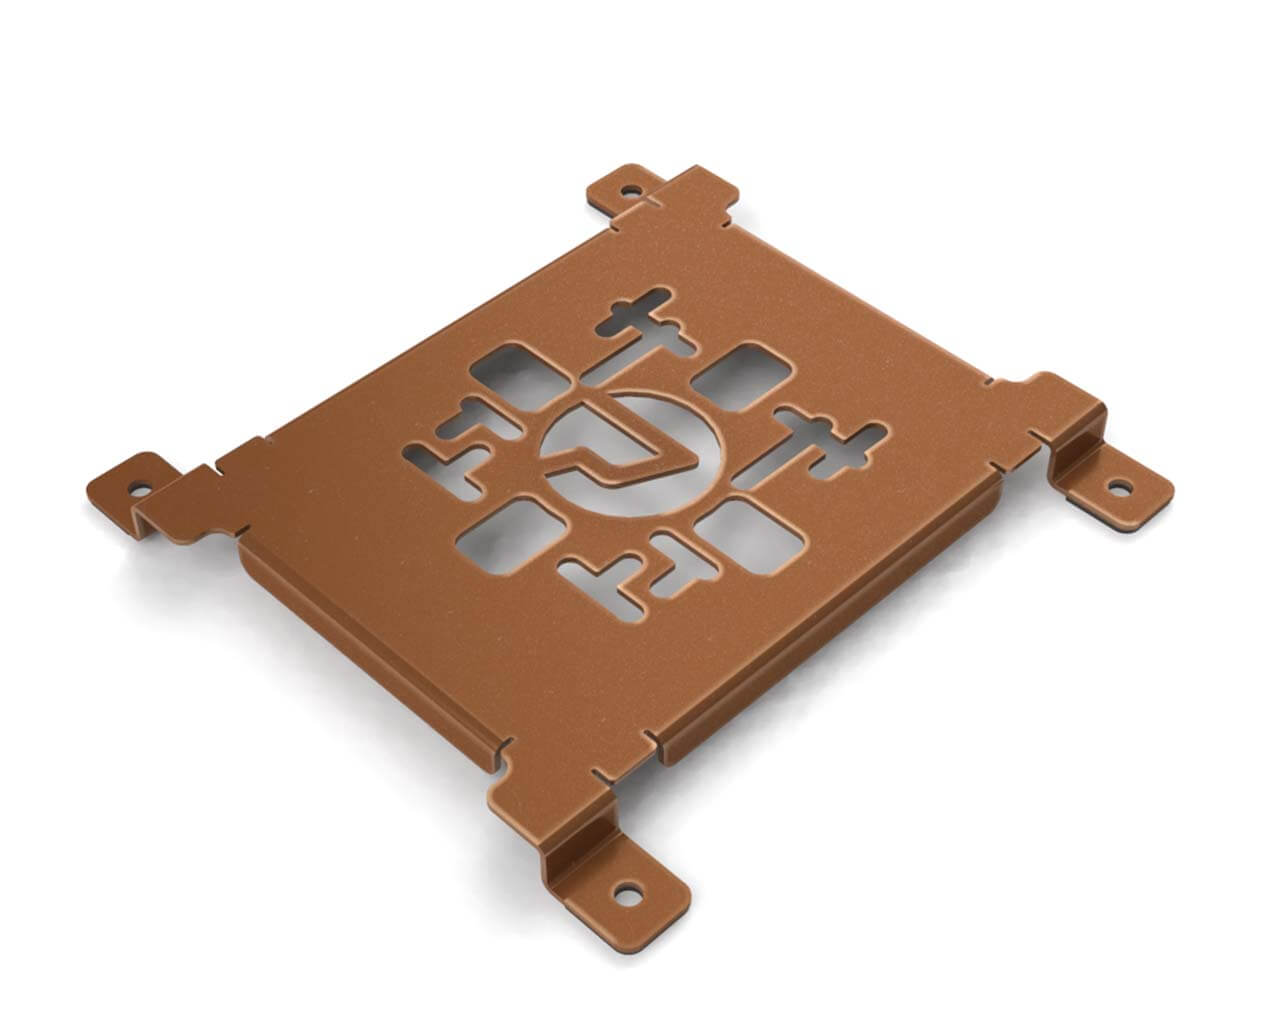 PrimoChill SX Spider Mount Bracket - 140mm Series - PrimoChill - KEEPING IT COOL Copper